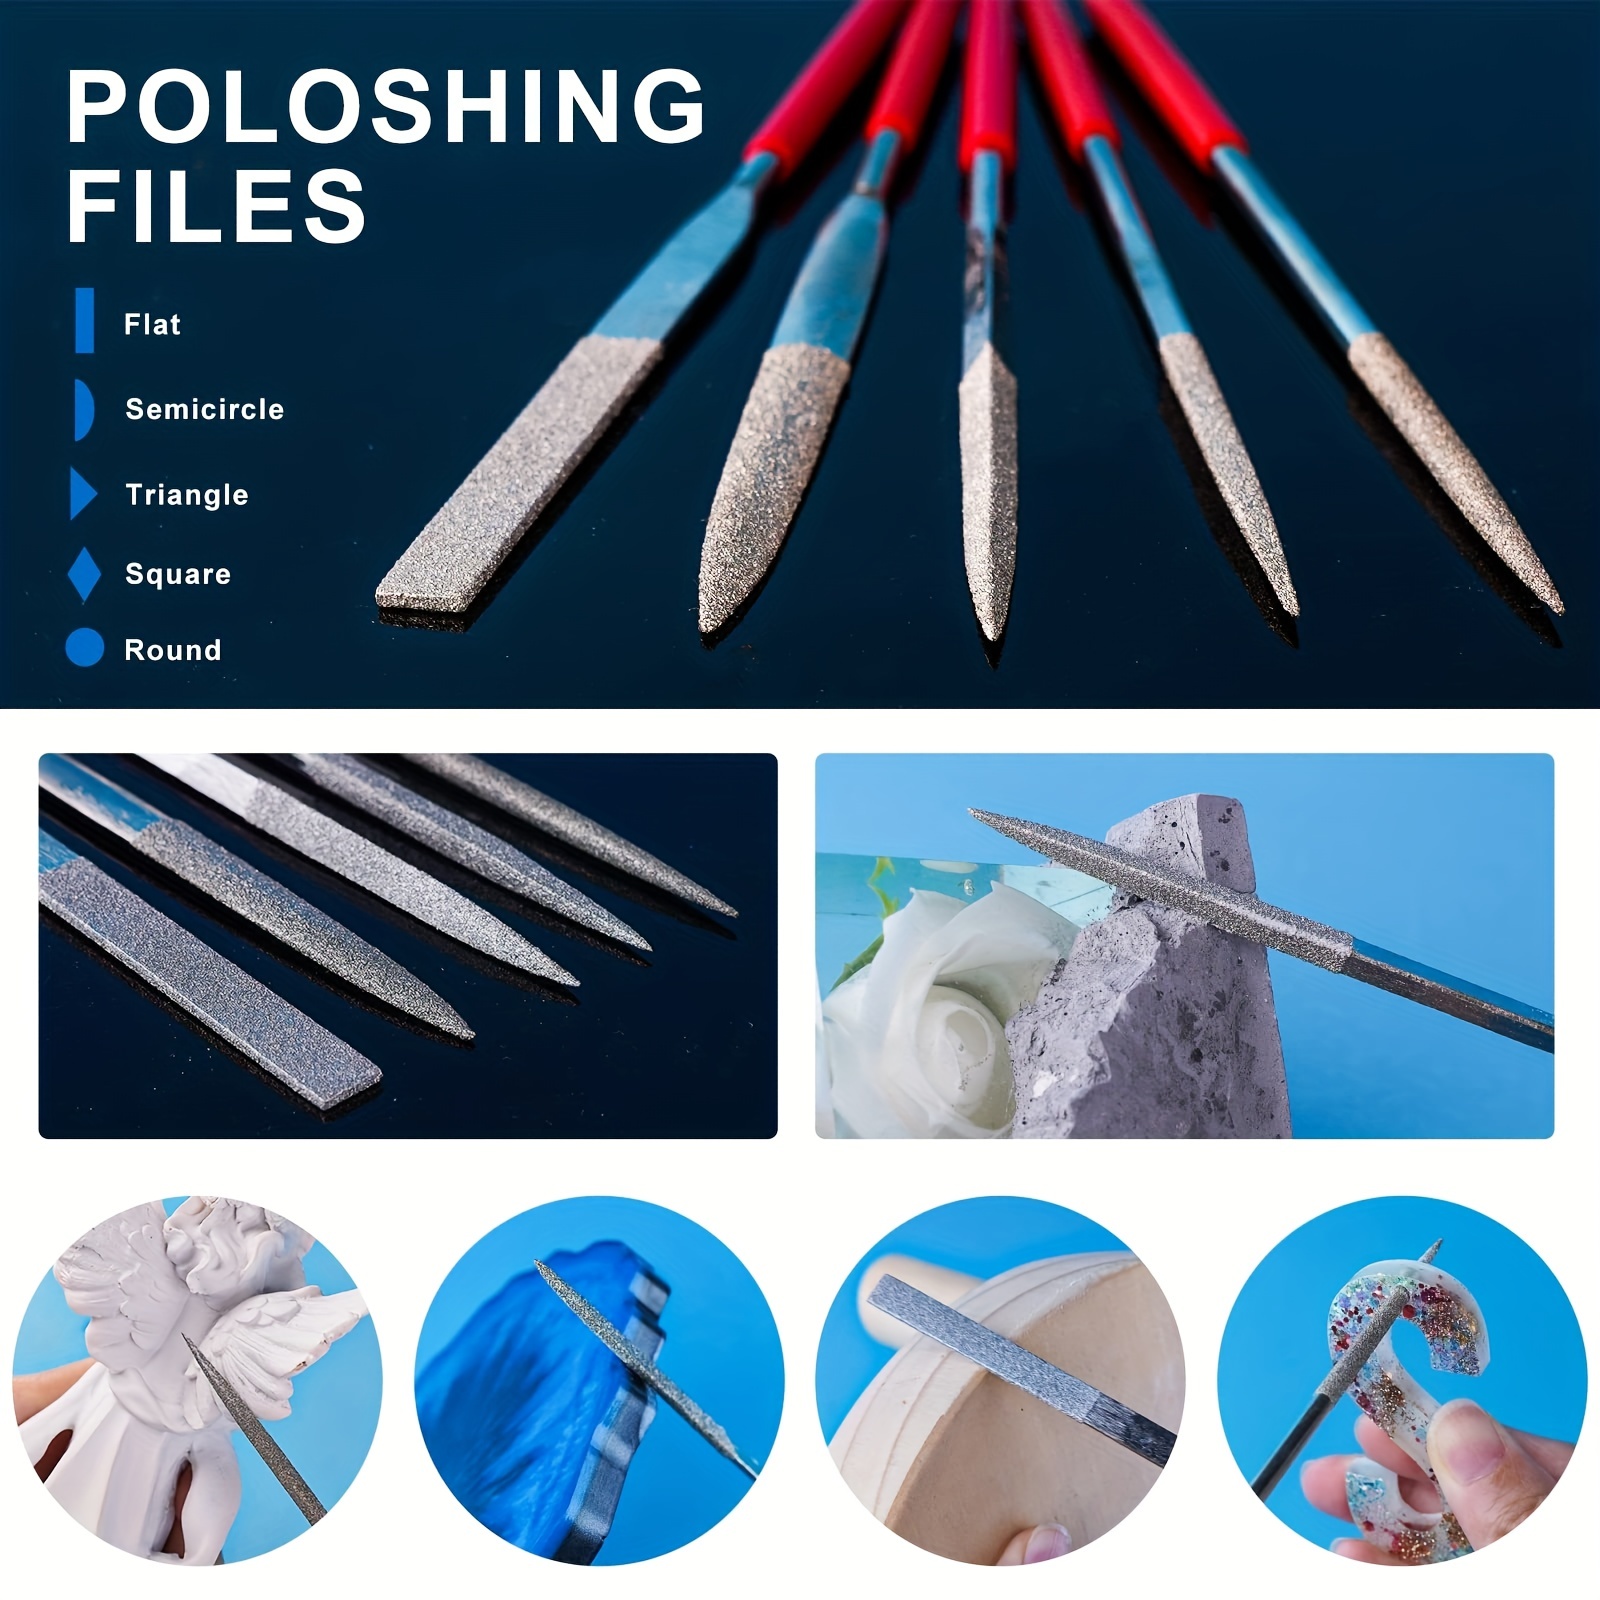 23 Pieces Resin Casting Tools Set, YGDZ Epoxy Resin Polishing and Sanding  Kit, Including 12 Large Sand Papers, 5 Polishing Blocks, 5 Shapes Files, 1  Brush for Resin Supplies Jewelry Making Tools